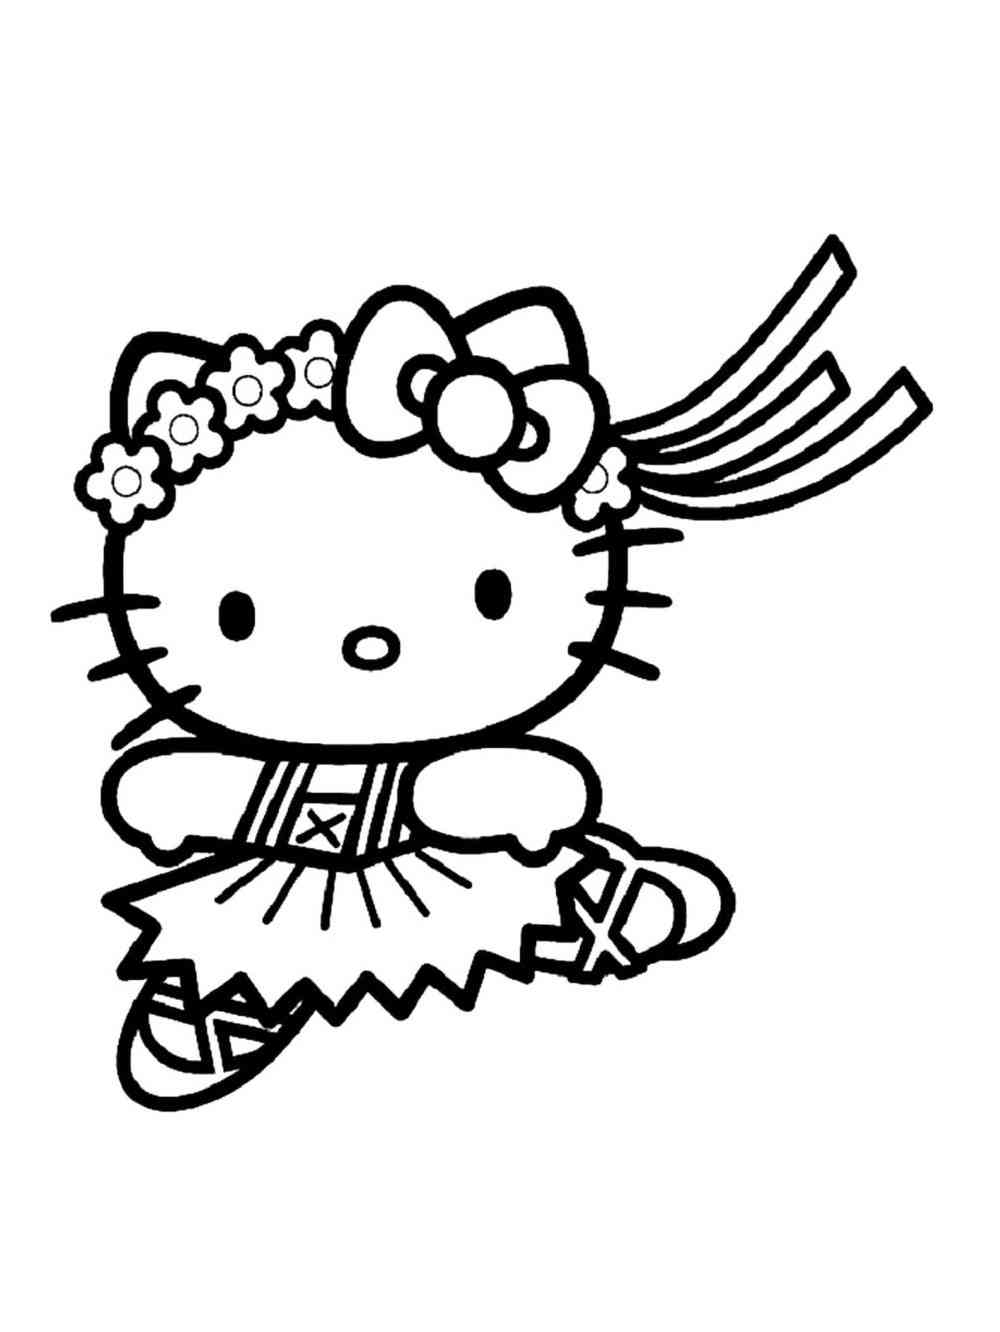 Funny Hello Kitty coloring page